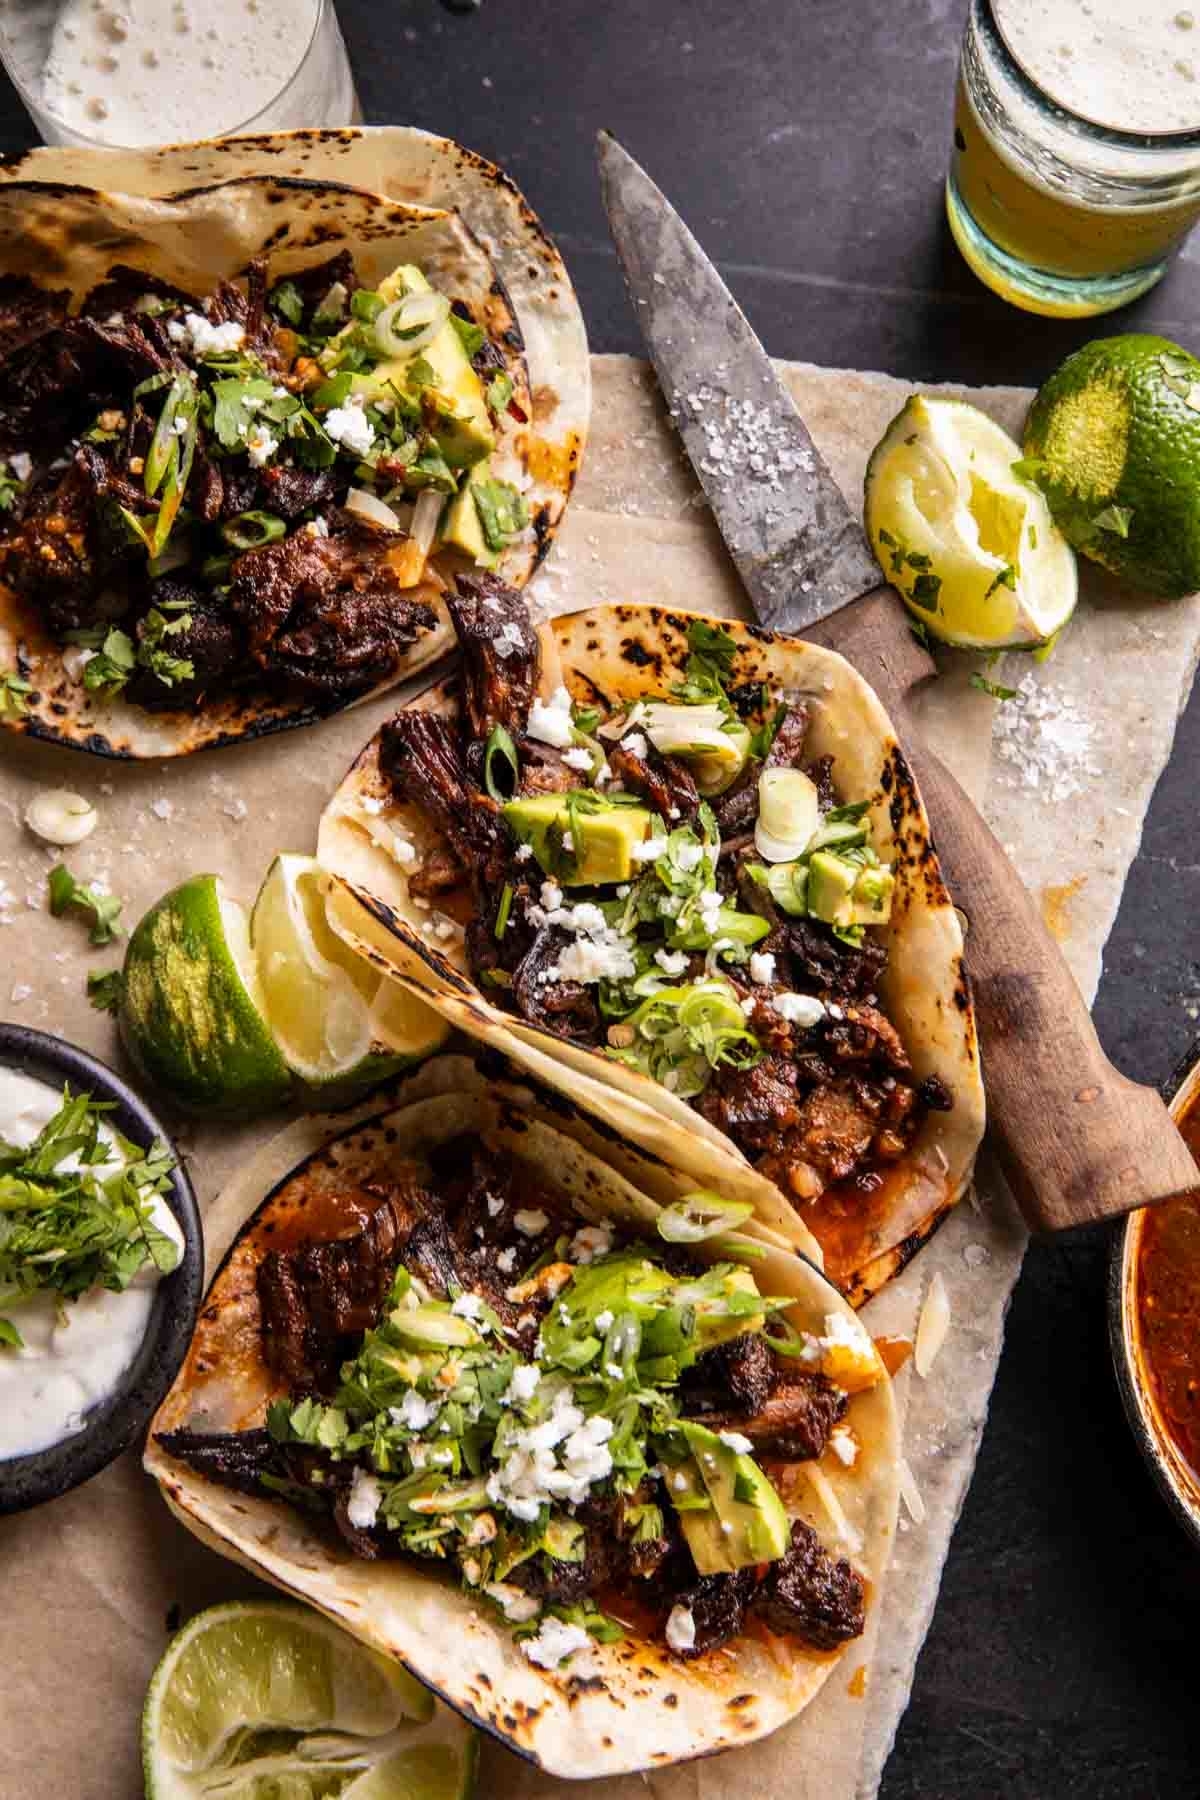 Three tacos with meat, garnished with cheese and herbs, presented on parchment paper next to limes and a knife